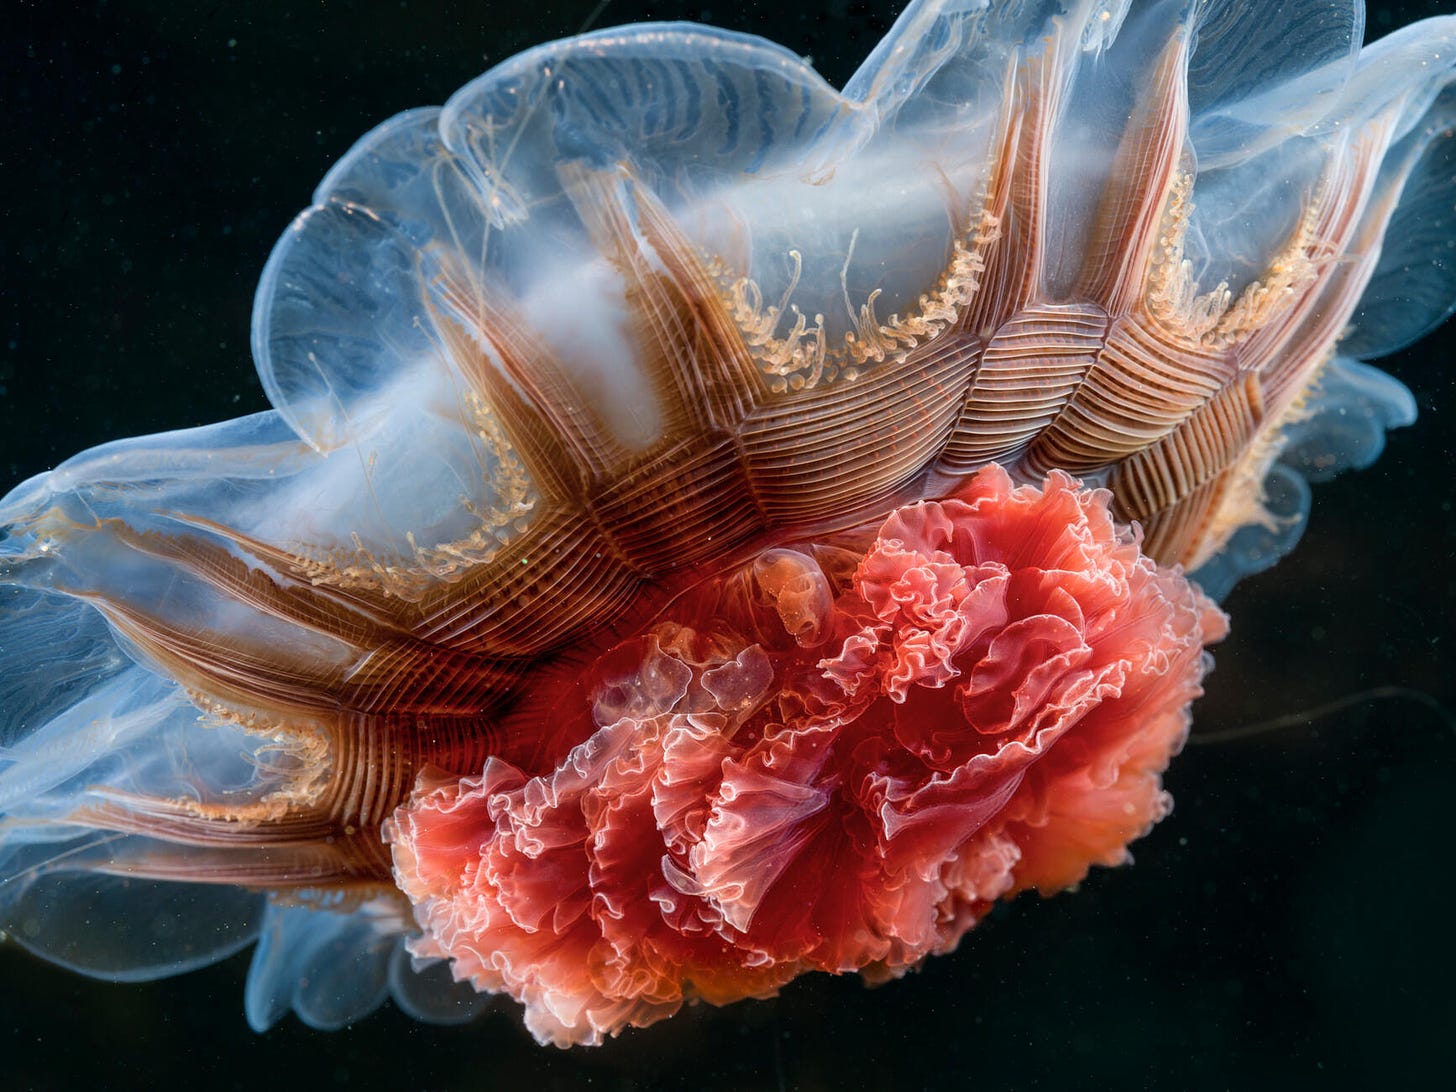 A large lion’s mane jellyfish with bright pink folds bunched together in the center; a widespread circular disk body that is both transparent and opaque with brown ribbed gills.